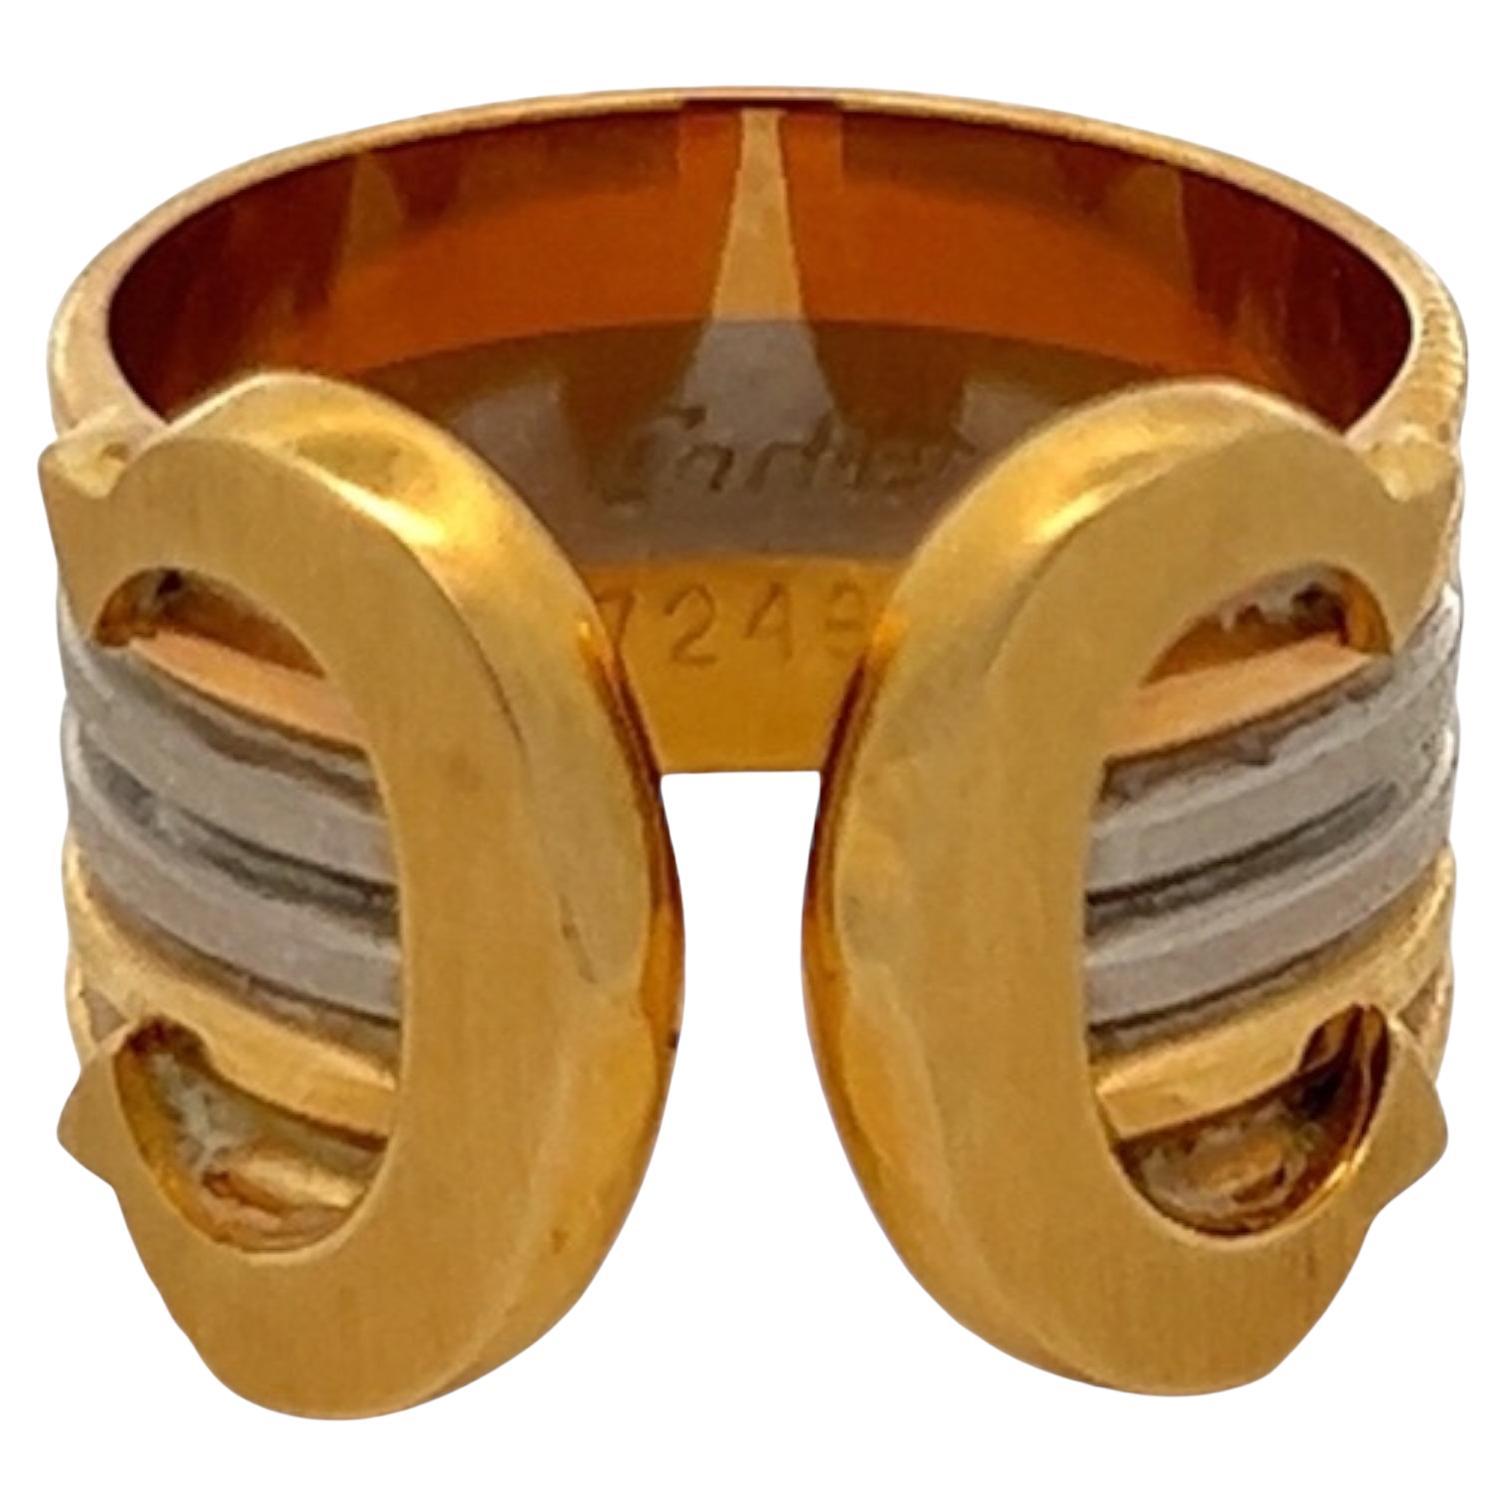 Cartier 18 Karat Tricolor Gold Trinity Double 'C' Pinky Band Ring Size